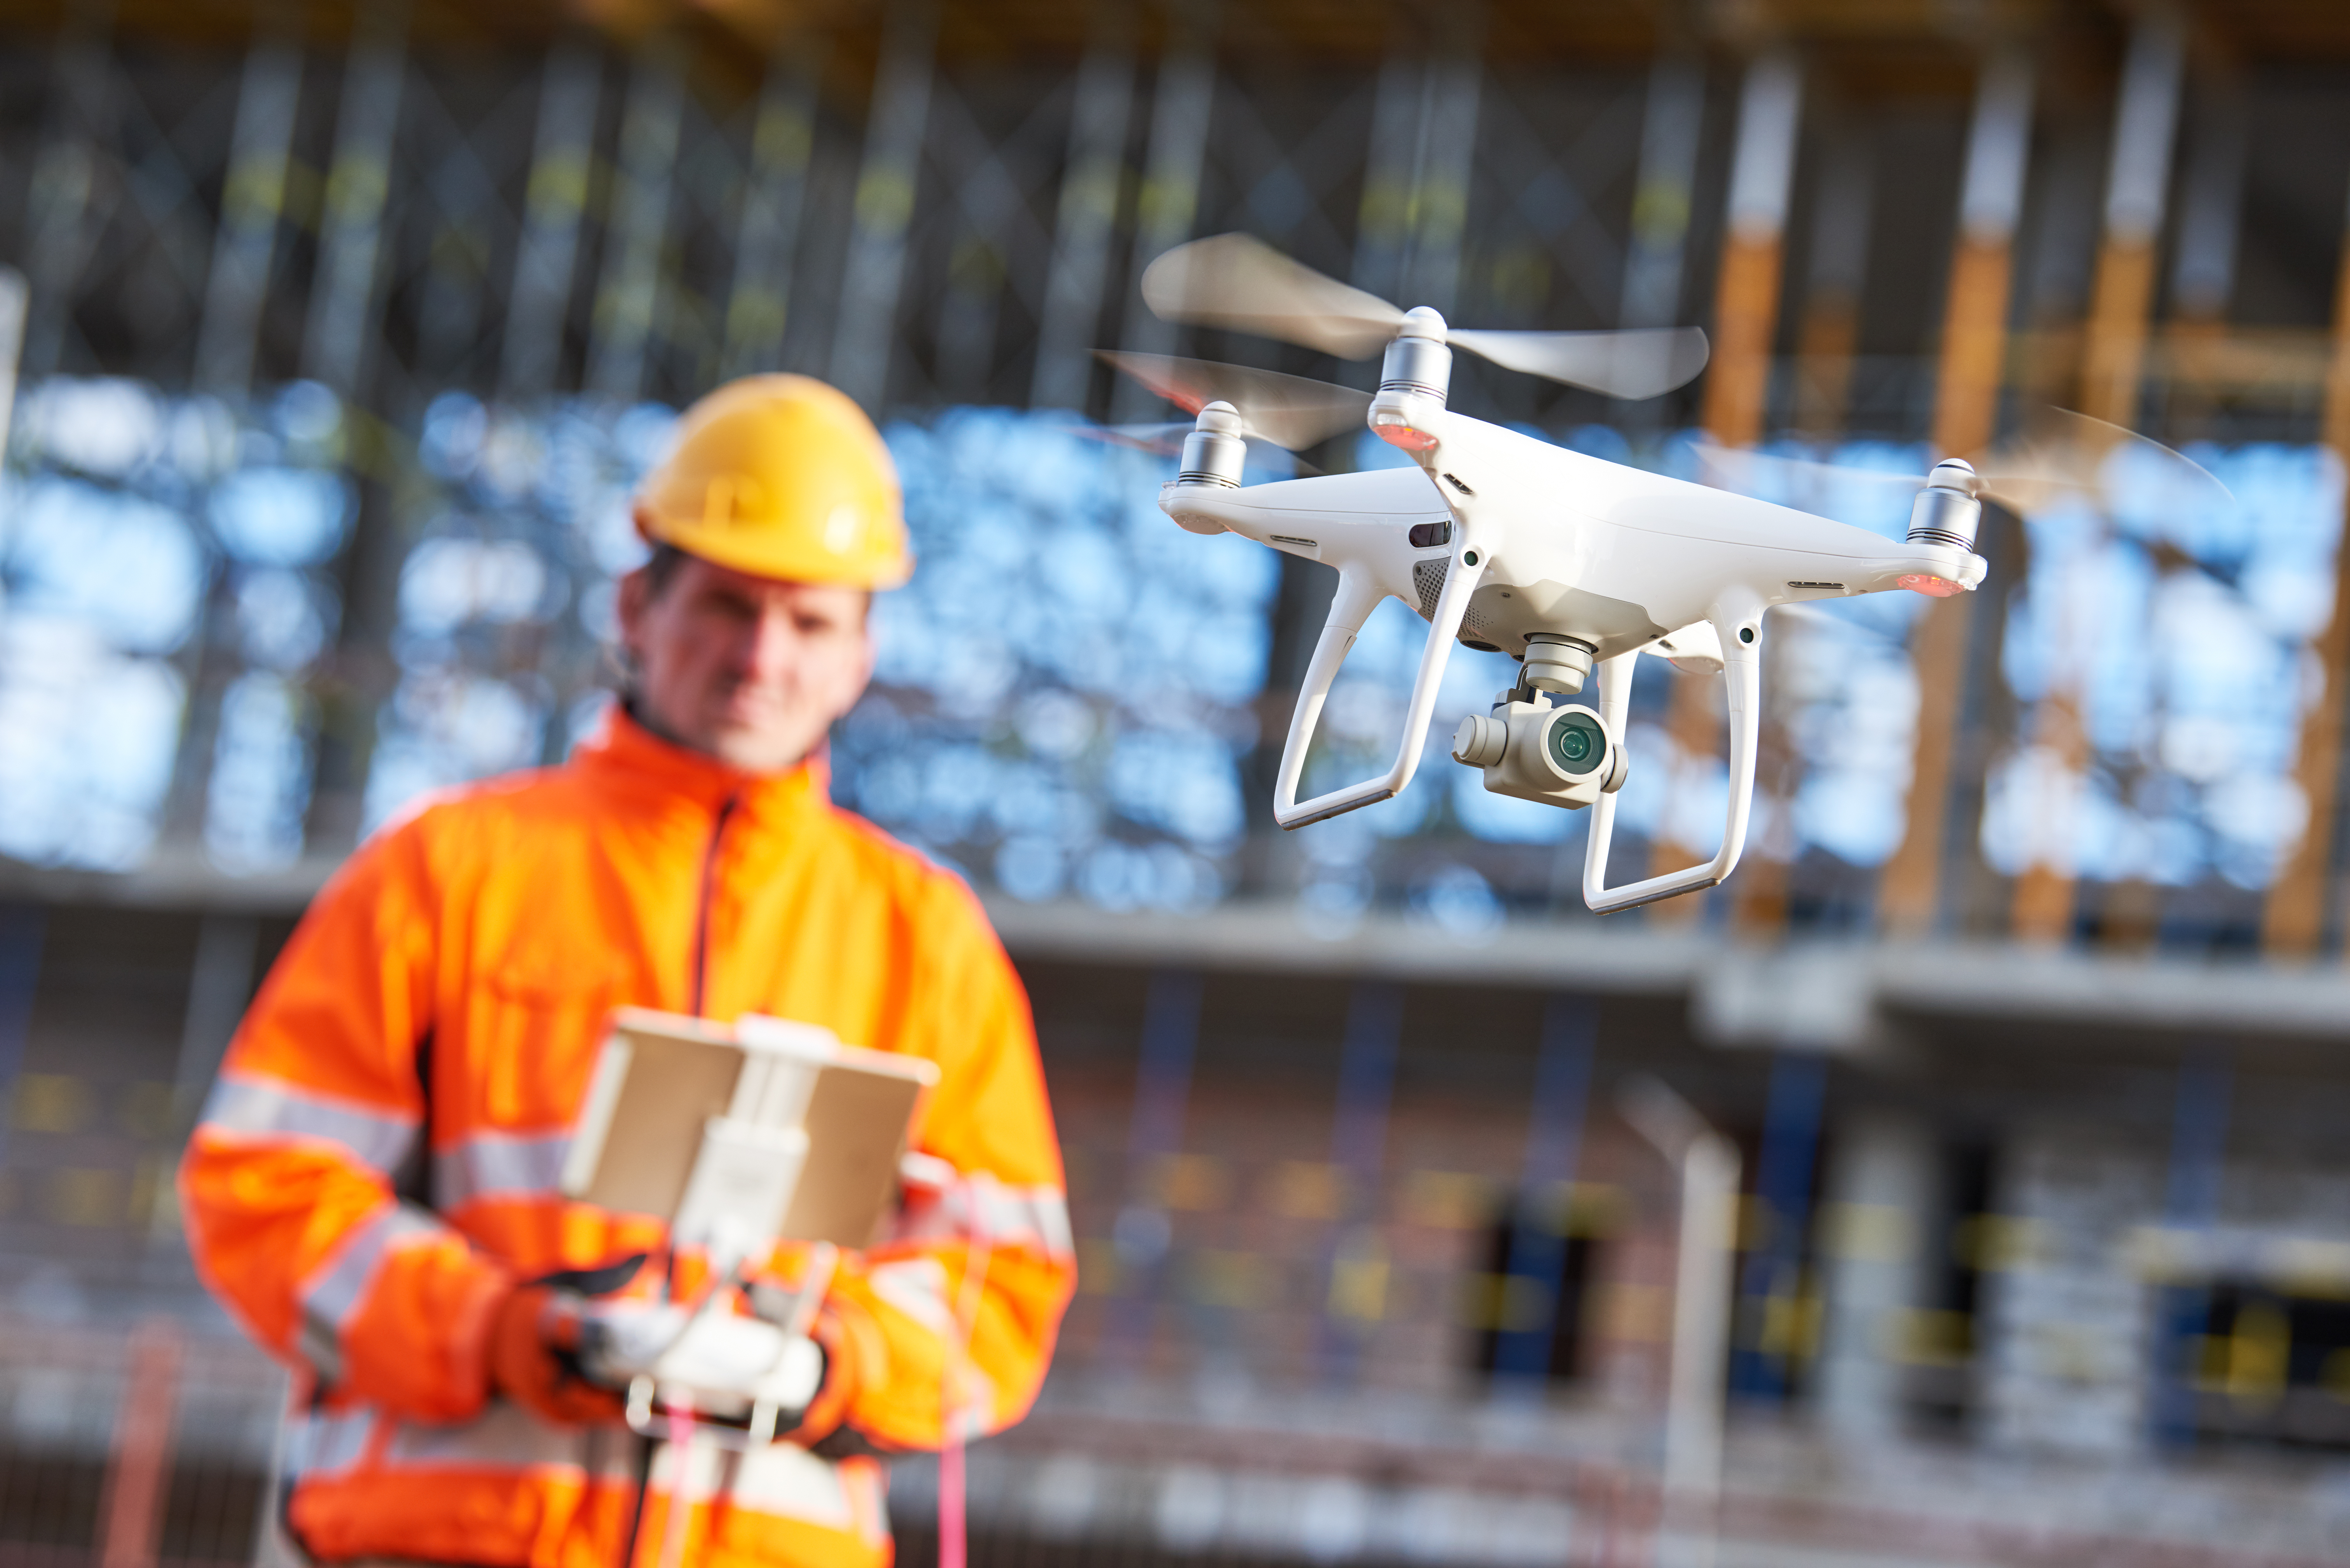 Drone Insurance at Work: Everything You Need to Know About Commercial Drone Insurance